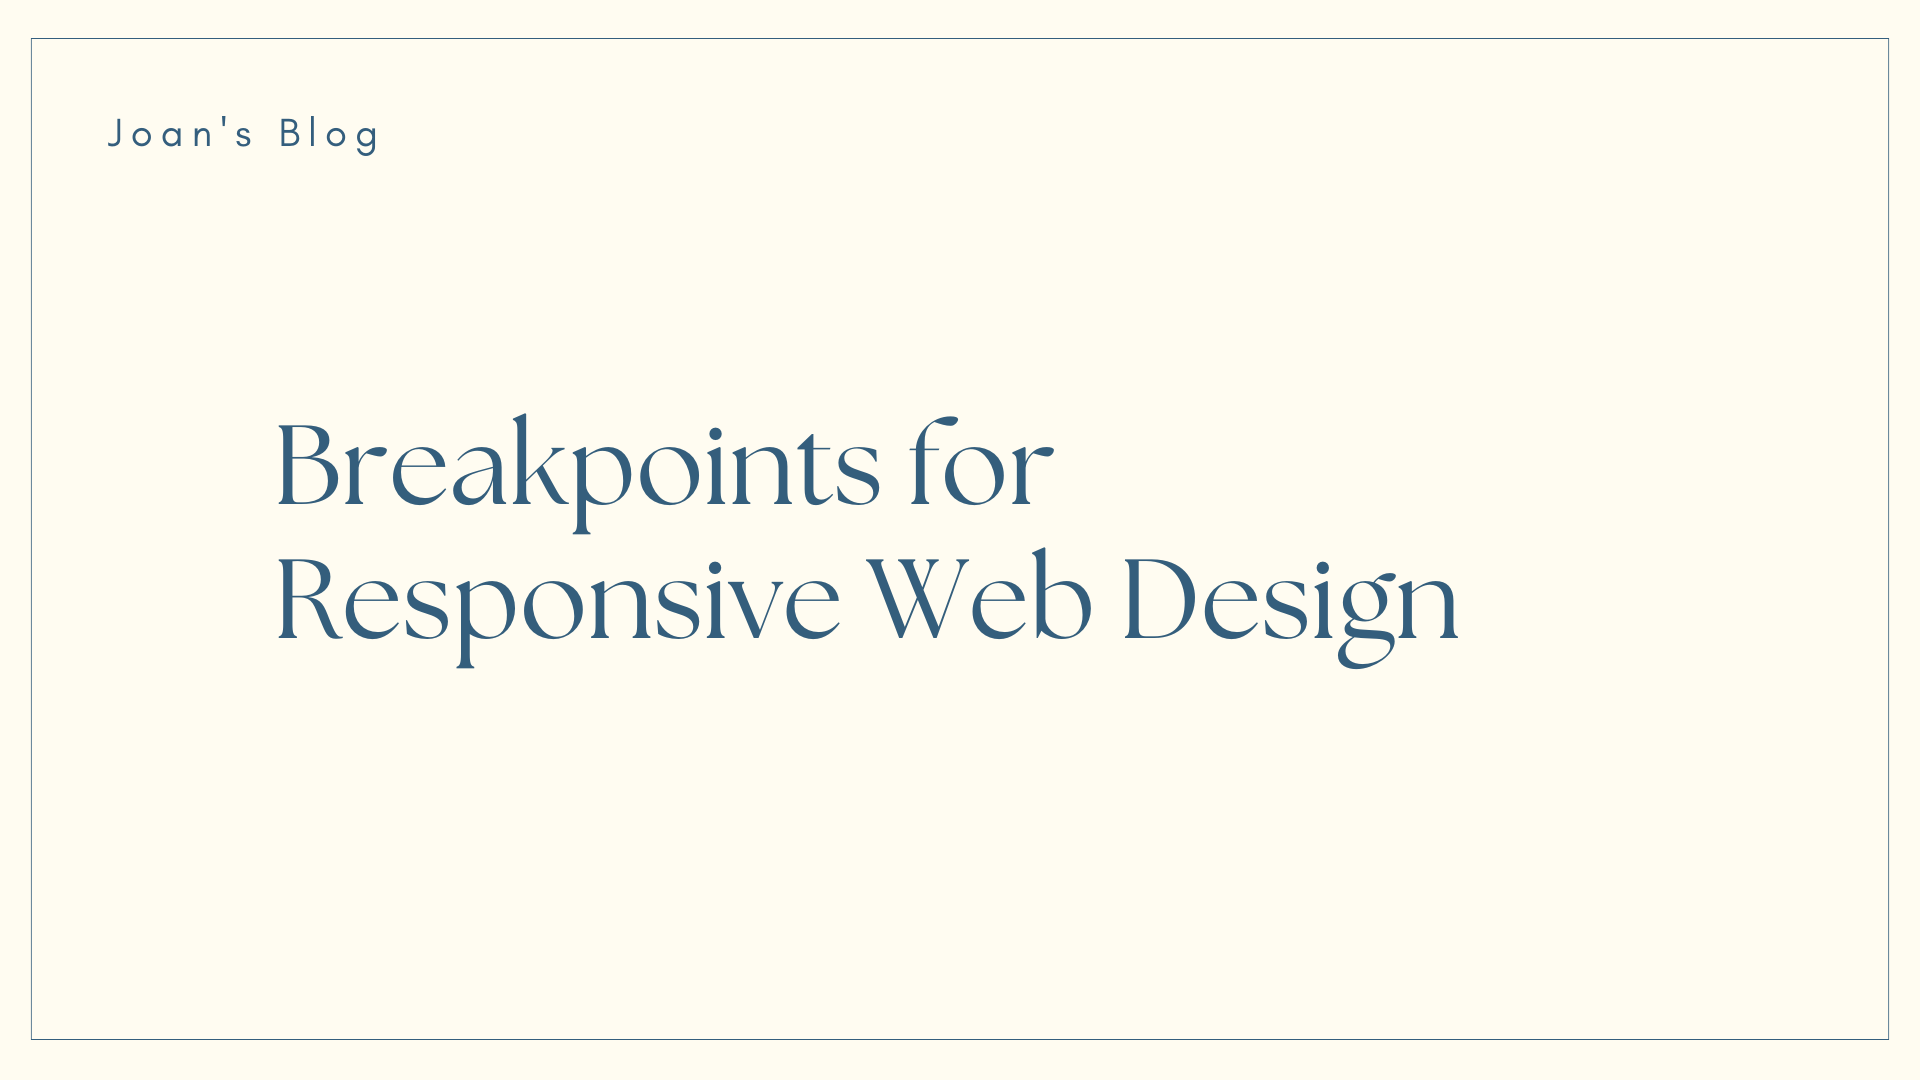 How to Use Breakpoints for Responsive Web Design